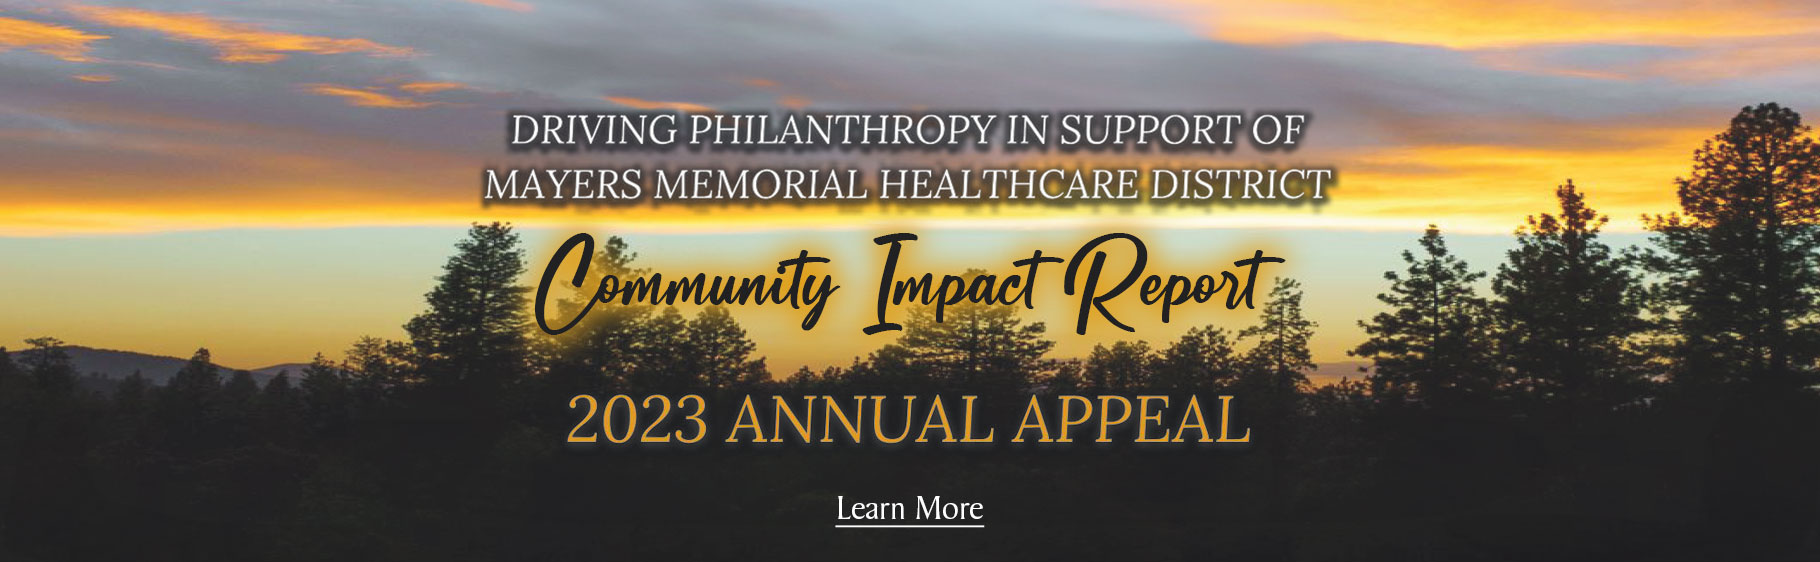 Driving Philanthropy in support of Mayers Mermorial Healthcare District 

Community Impact Report

2023 Annual Appeal

Learn More by clicking here